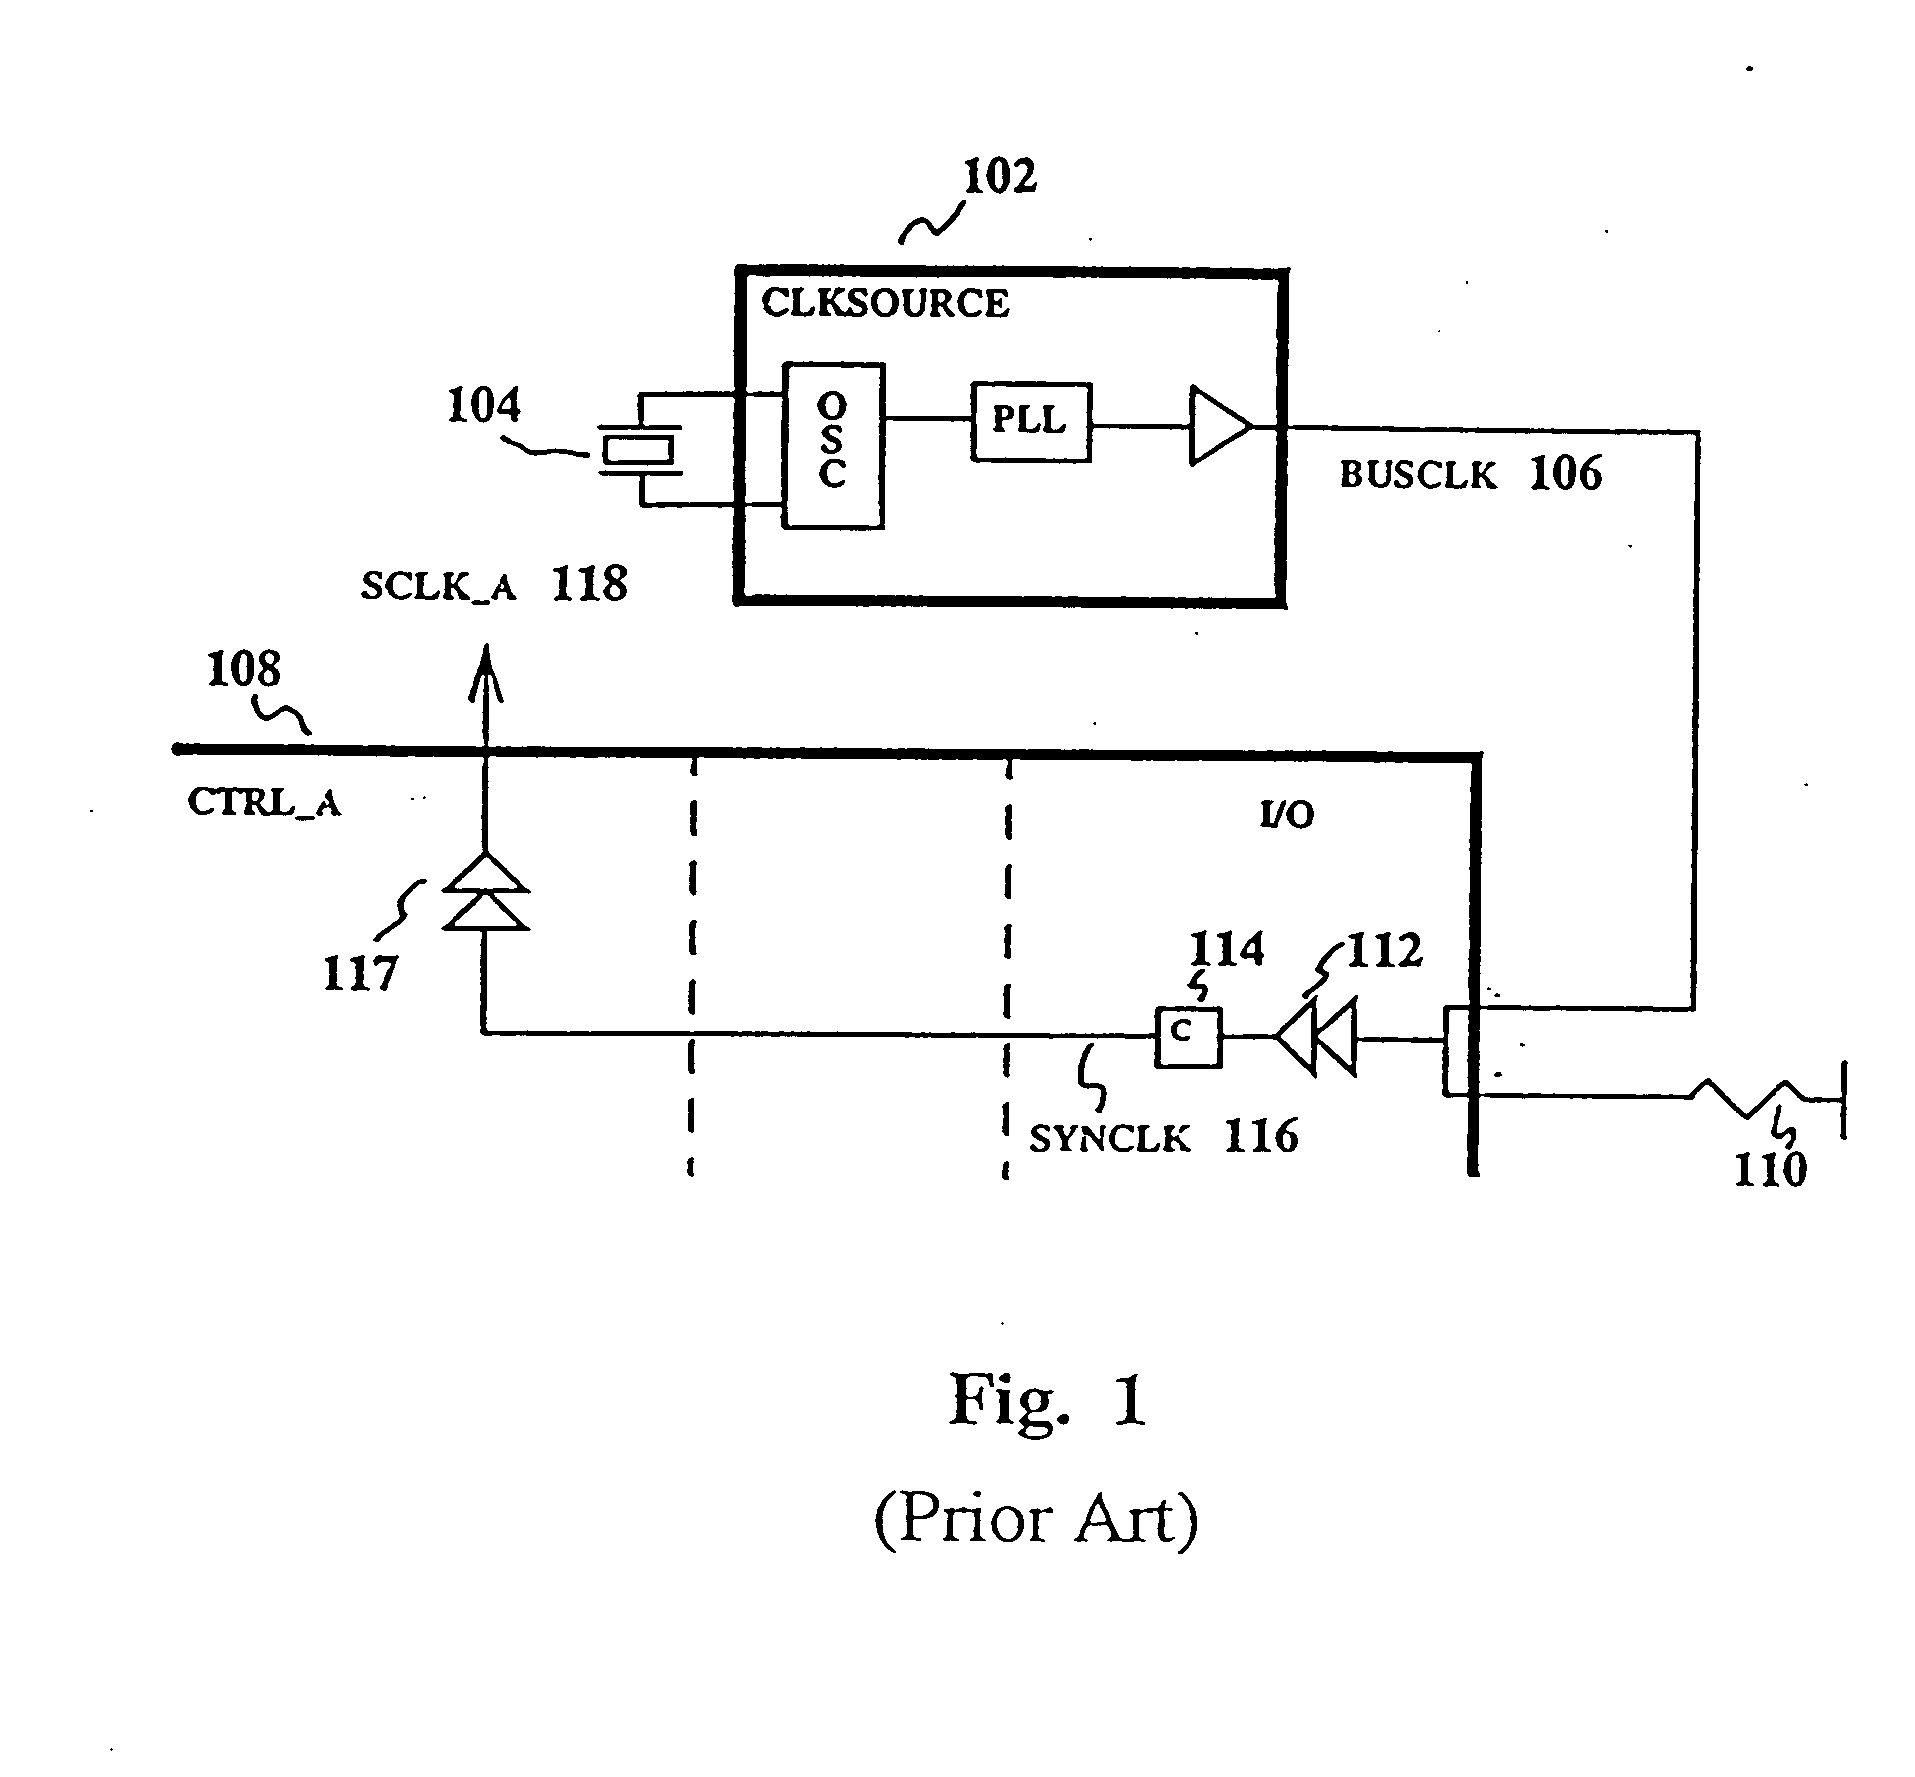 Apparatus and method for generating a distributed clock signal